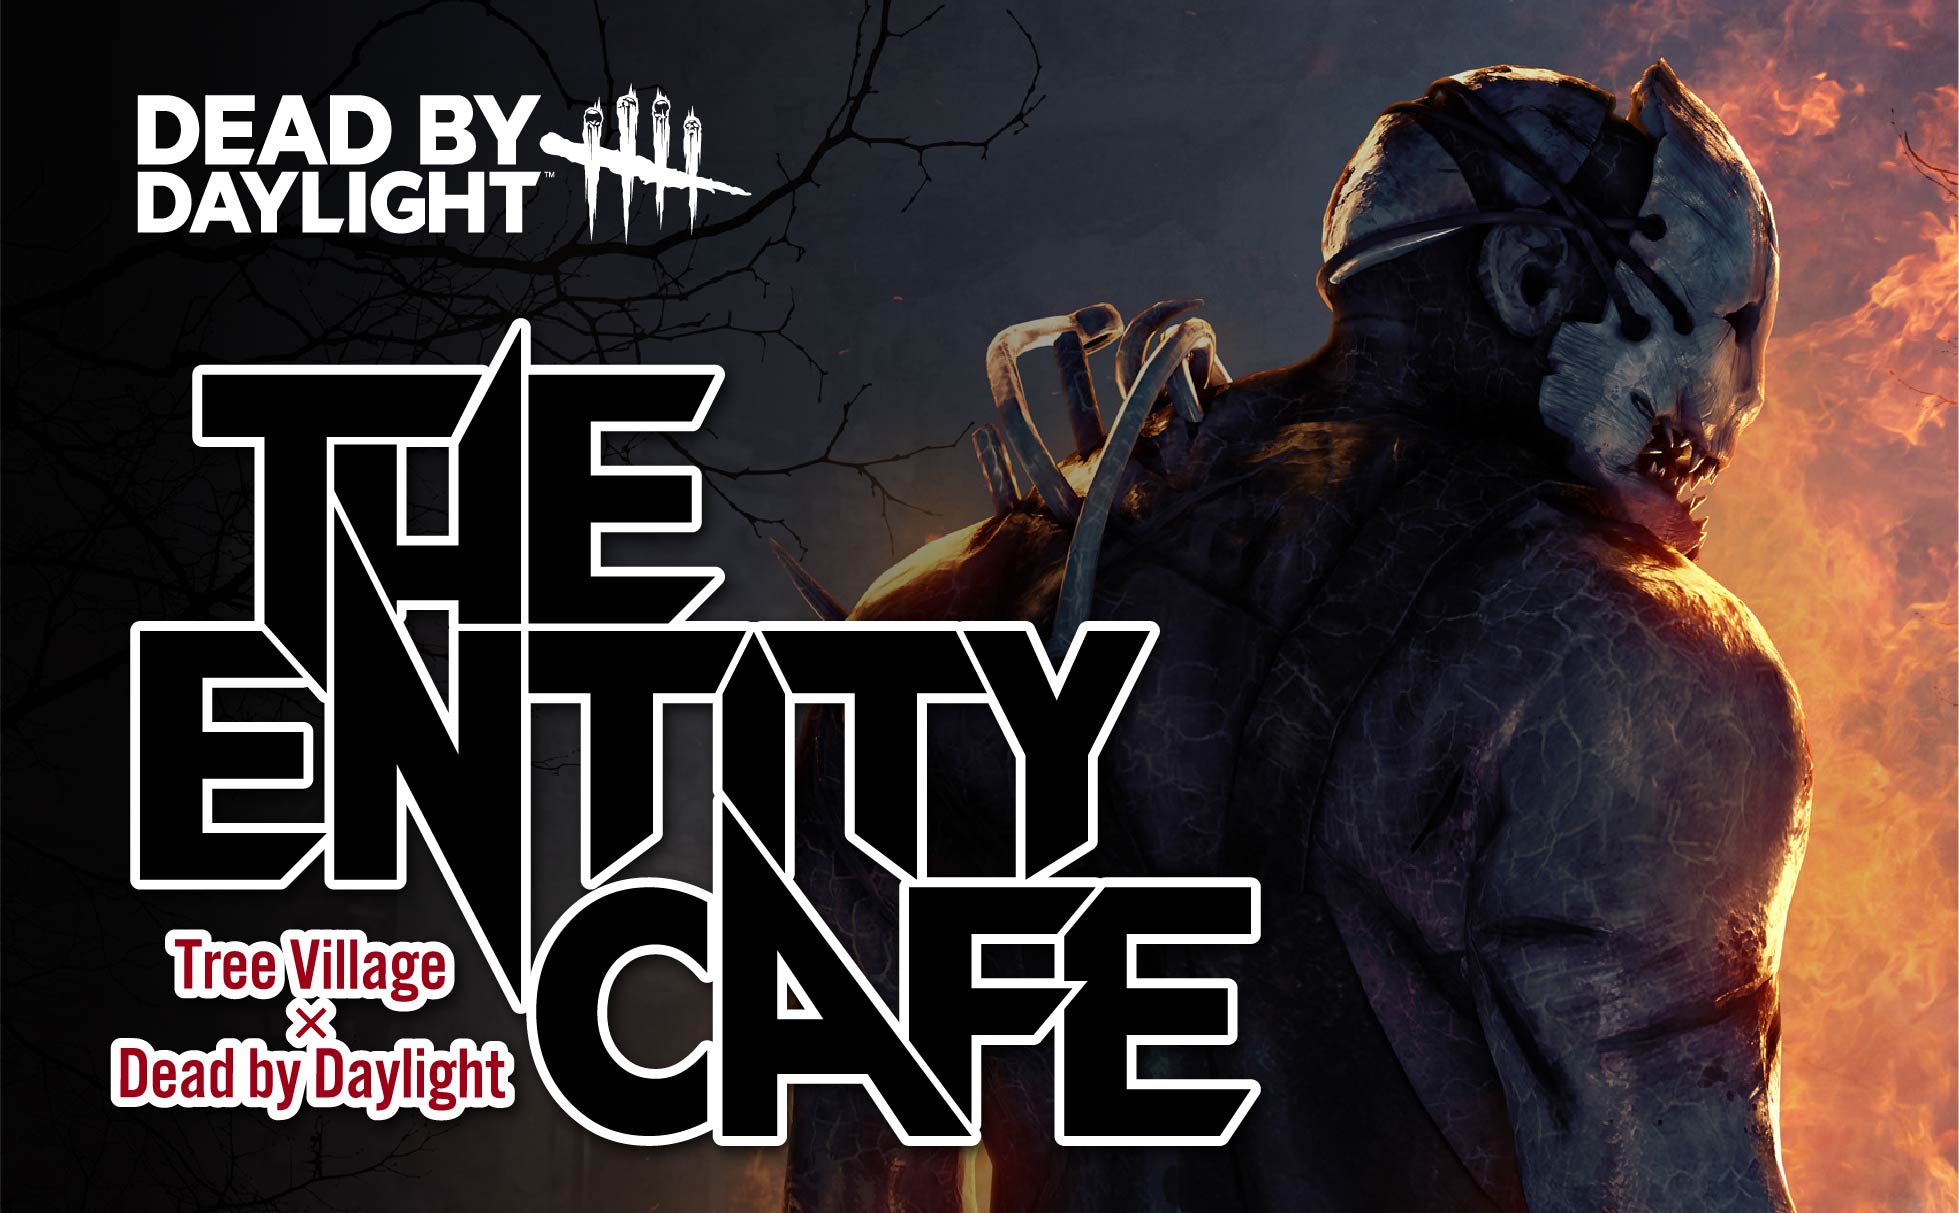 DEAD BY DAYLIGHT The Entity Cafe